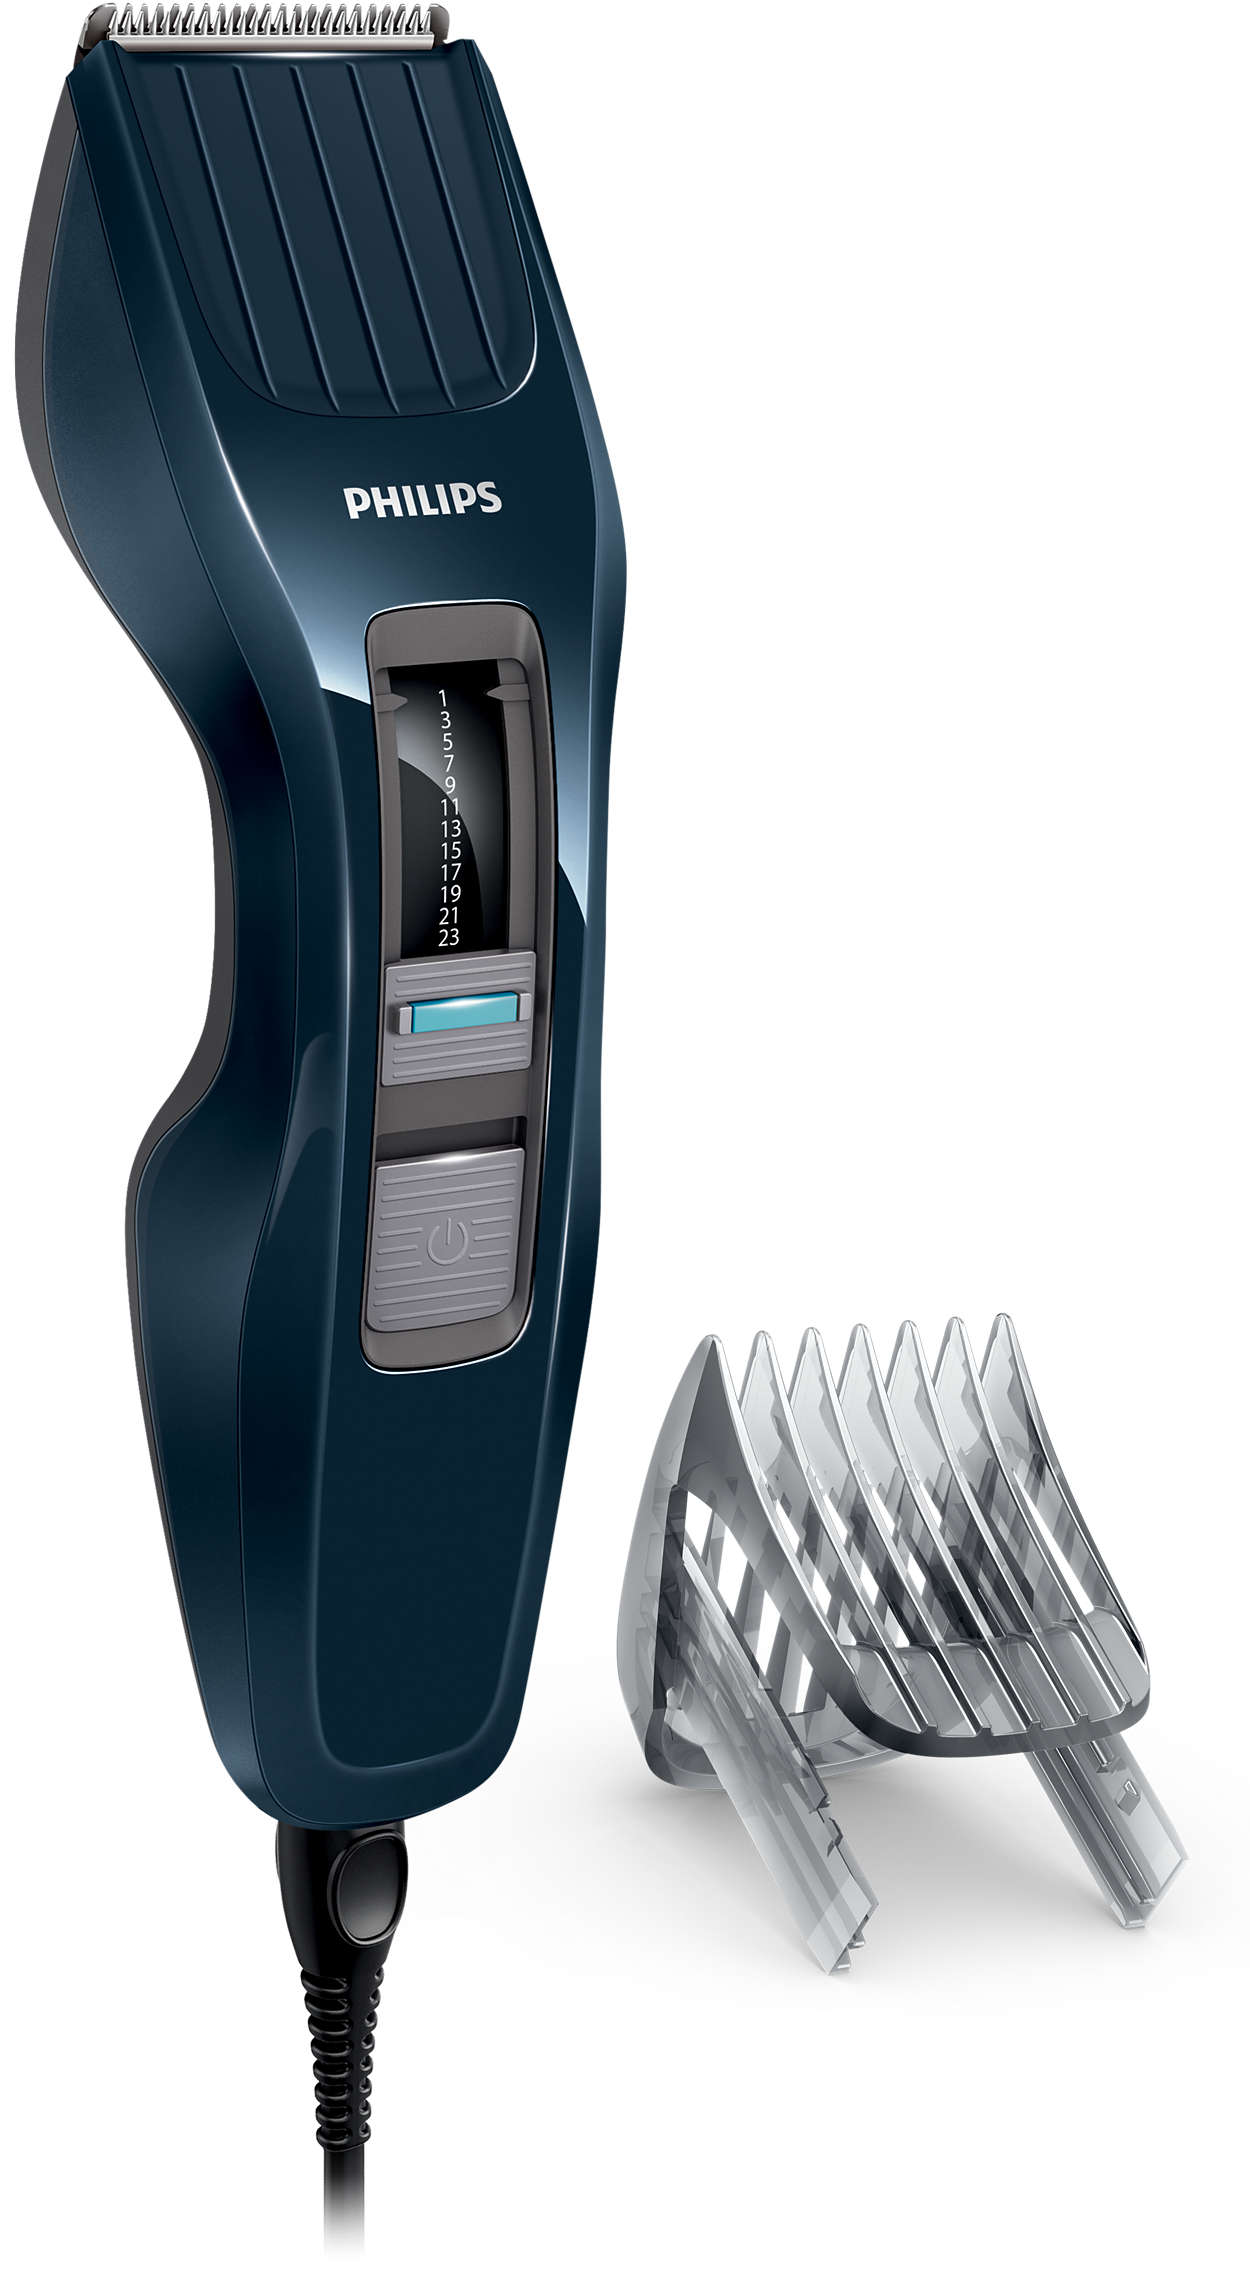 HAIRCLIPPER Series 3000 - Cuts twice as fast*